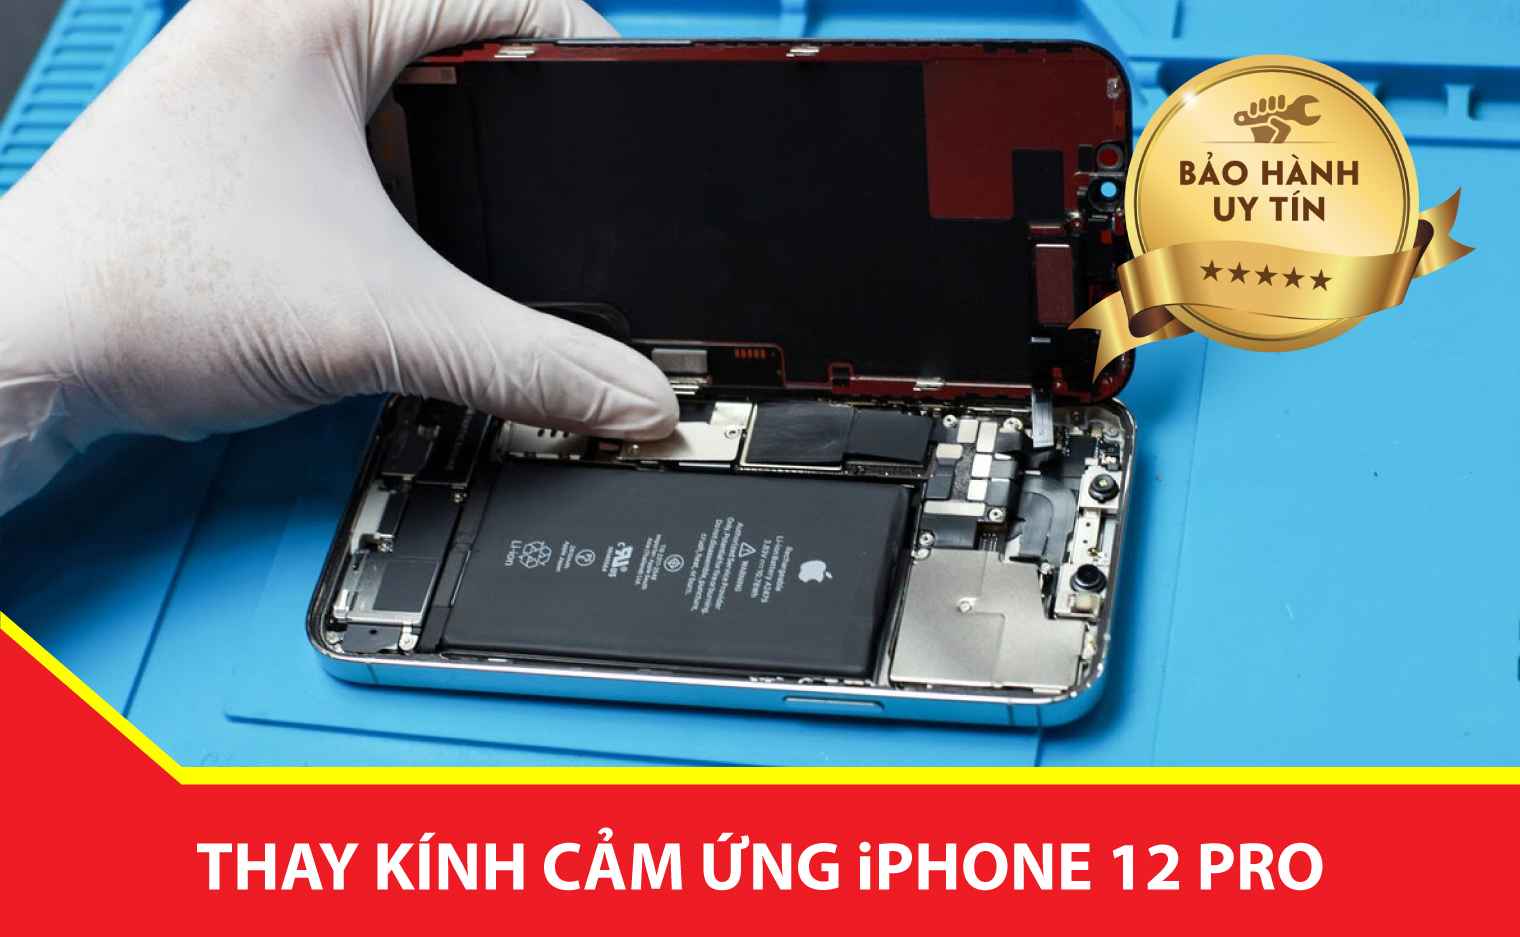 thay kinh cam ung iphone 12 pro